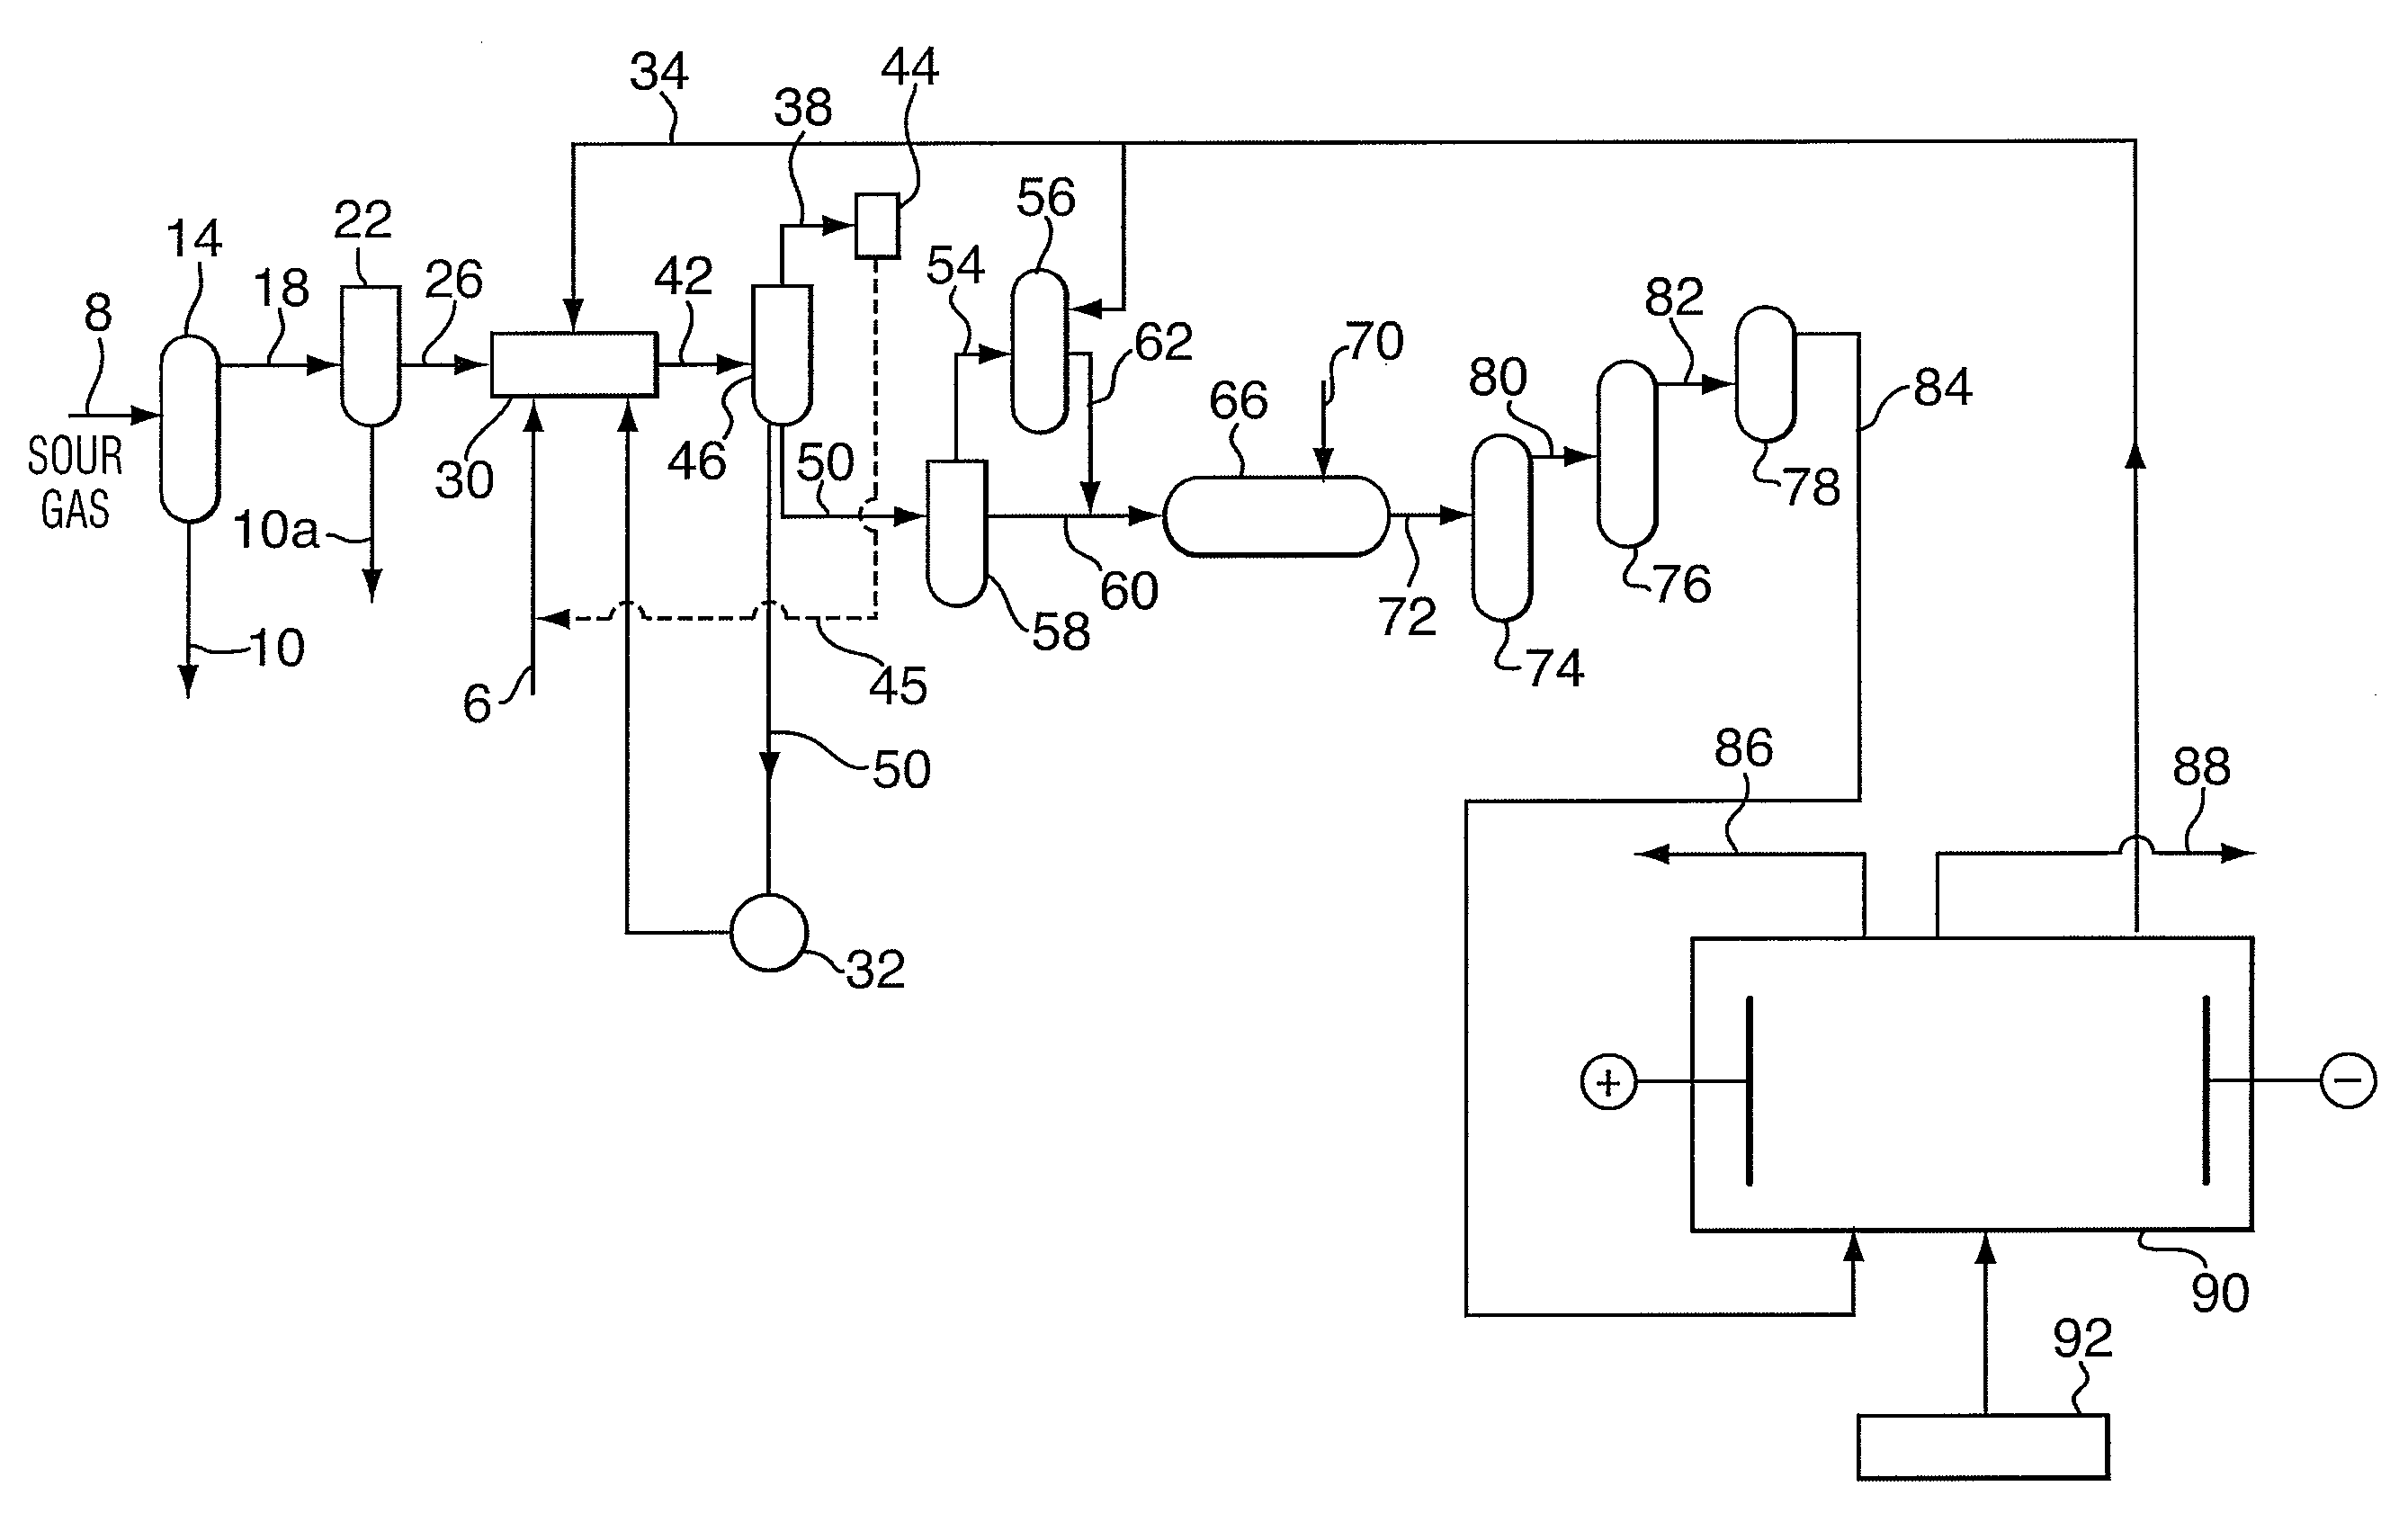 Method for sour gas treatment